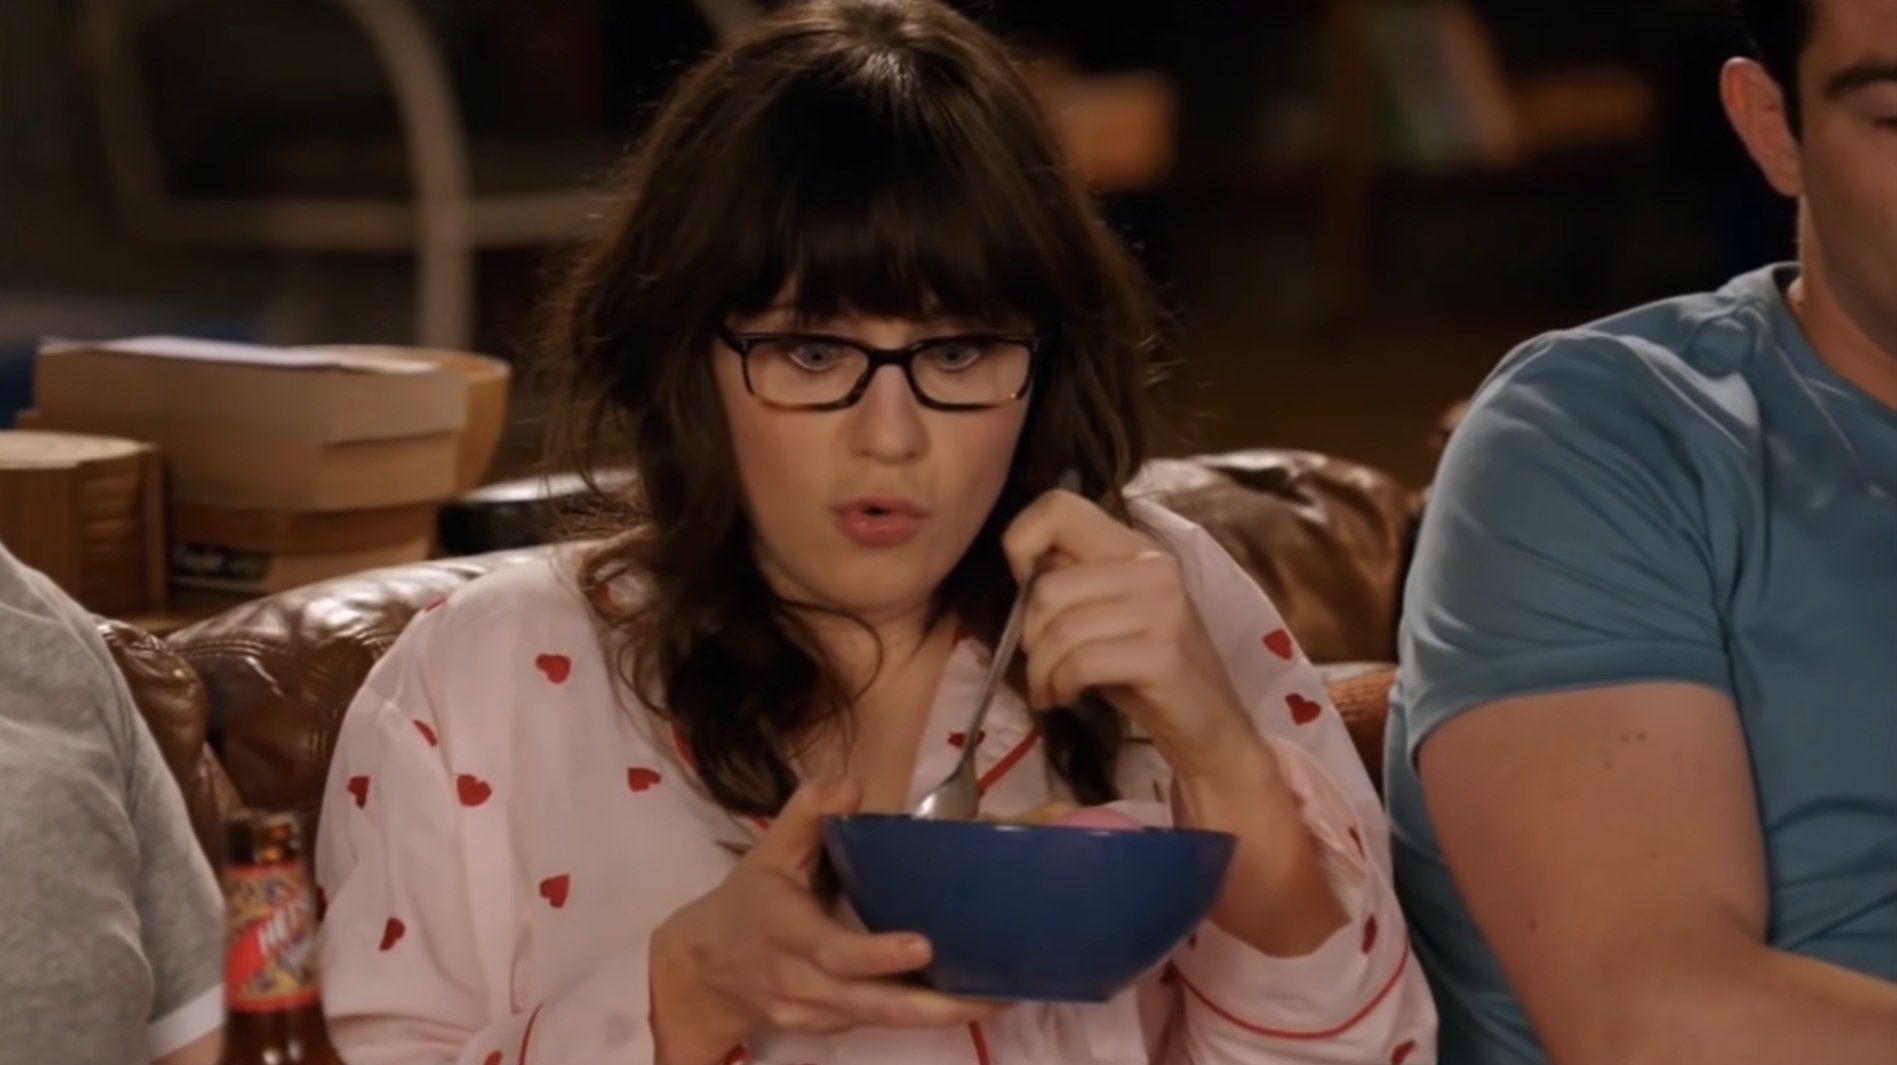 Jess looking at a bowl of cereal in New Girl